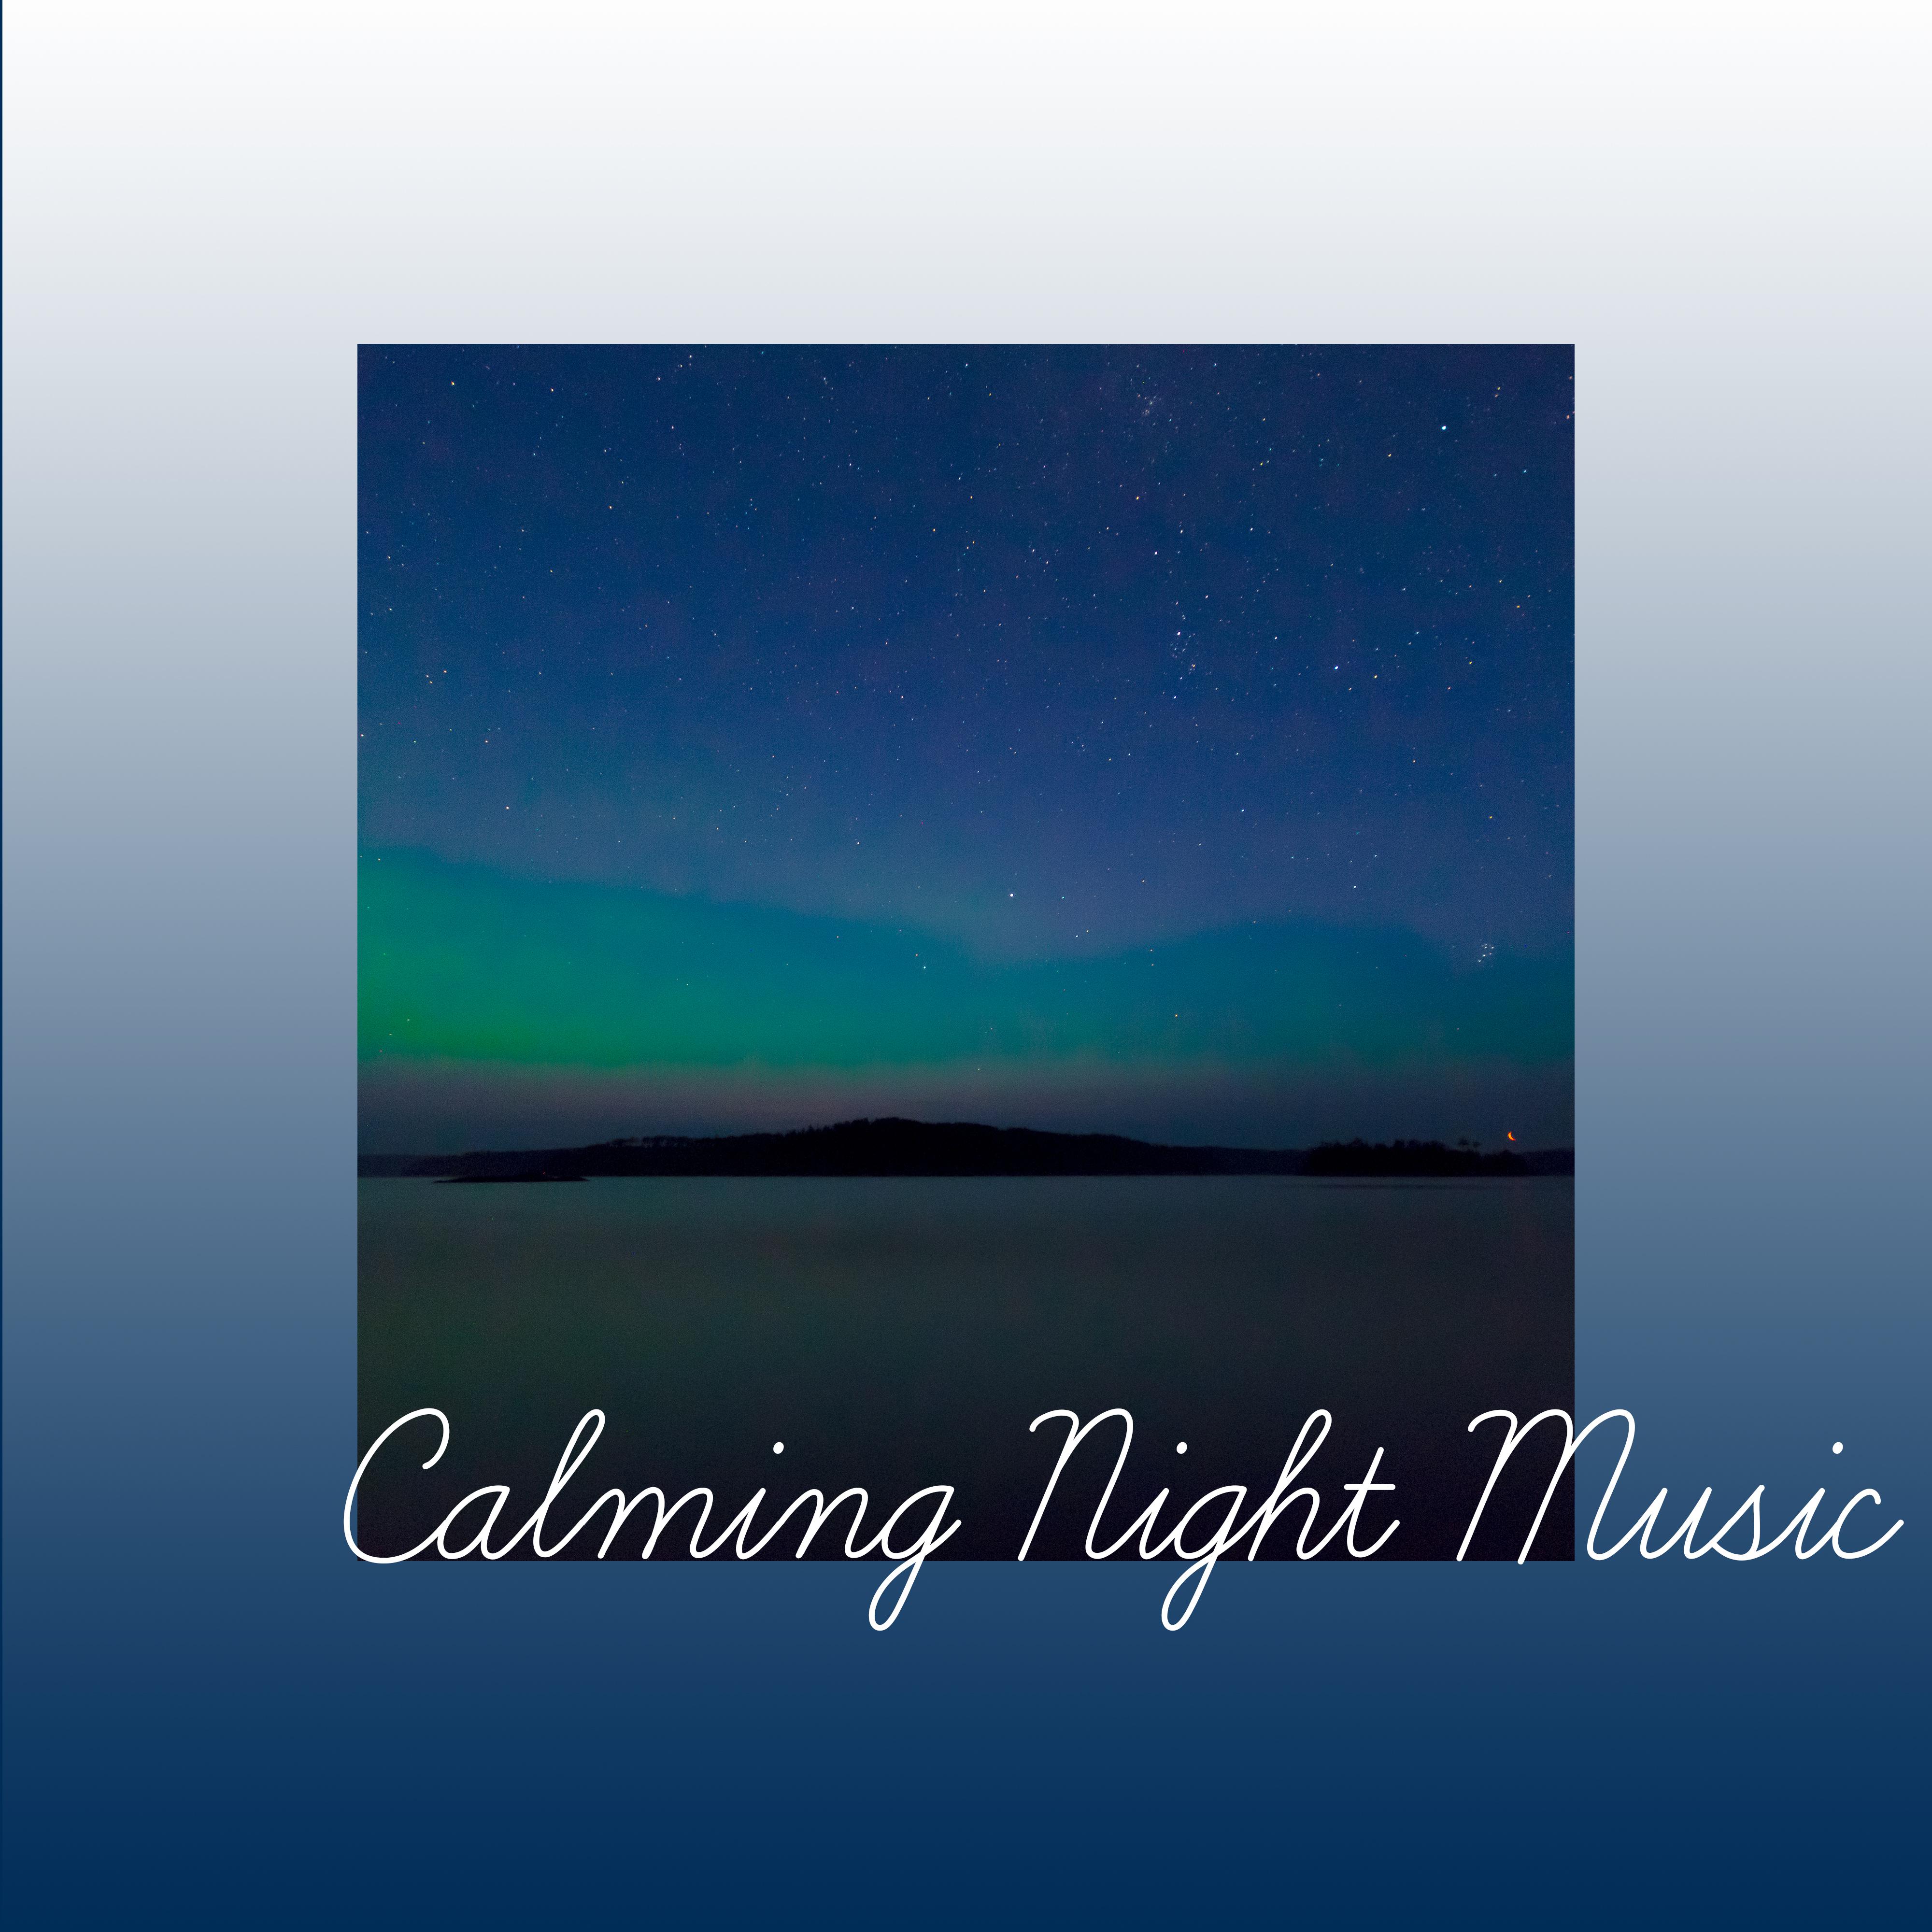 Calming Night Music – New Age, Peaceful Sounds of Nature for Relax Before Sleep, Bedtime Meditation, Music for Sleep